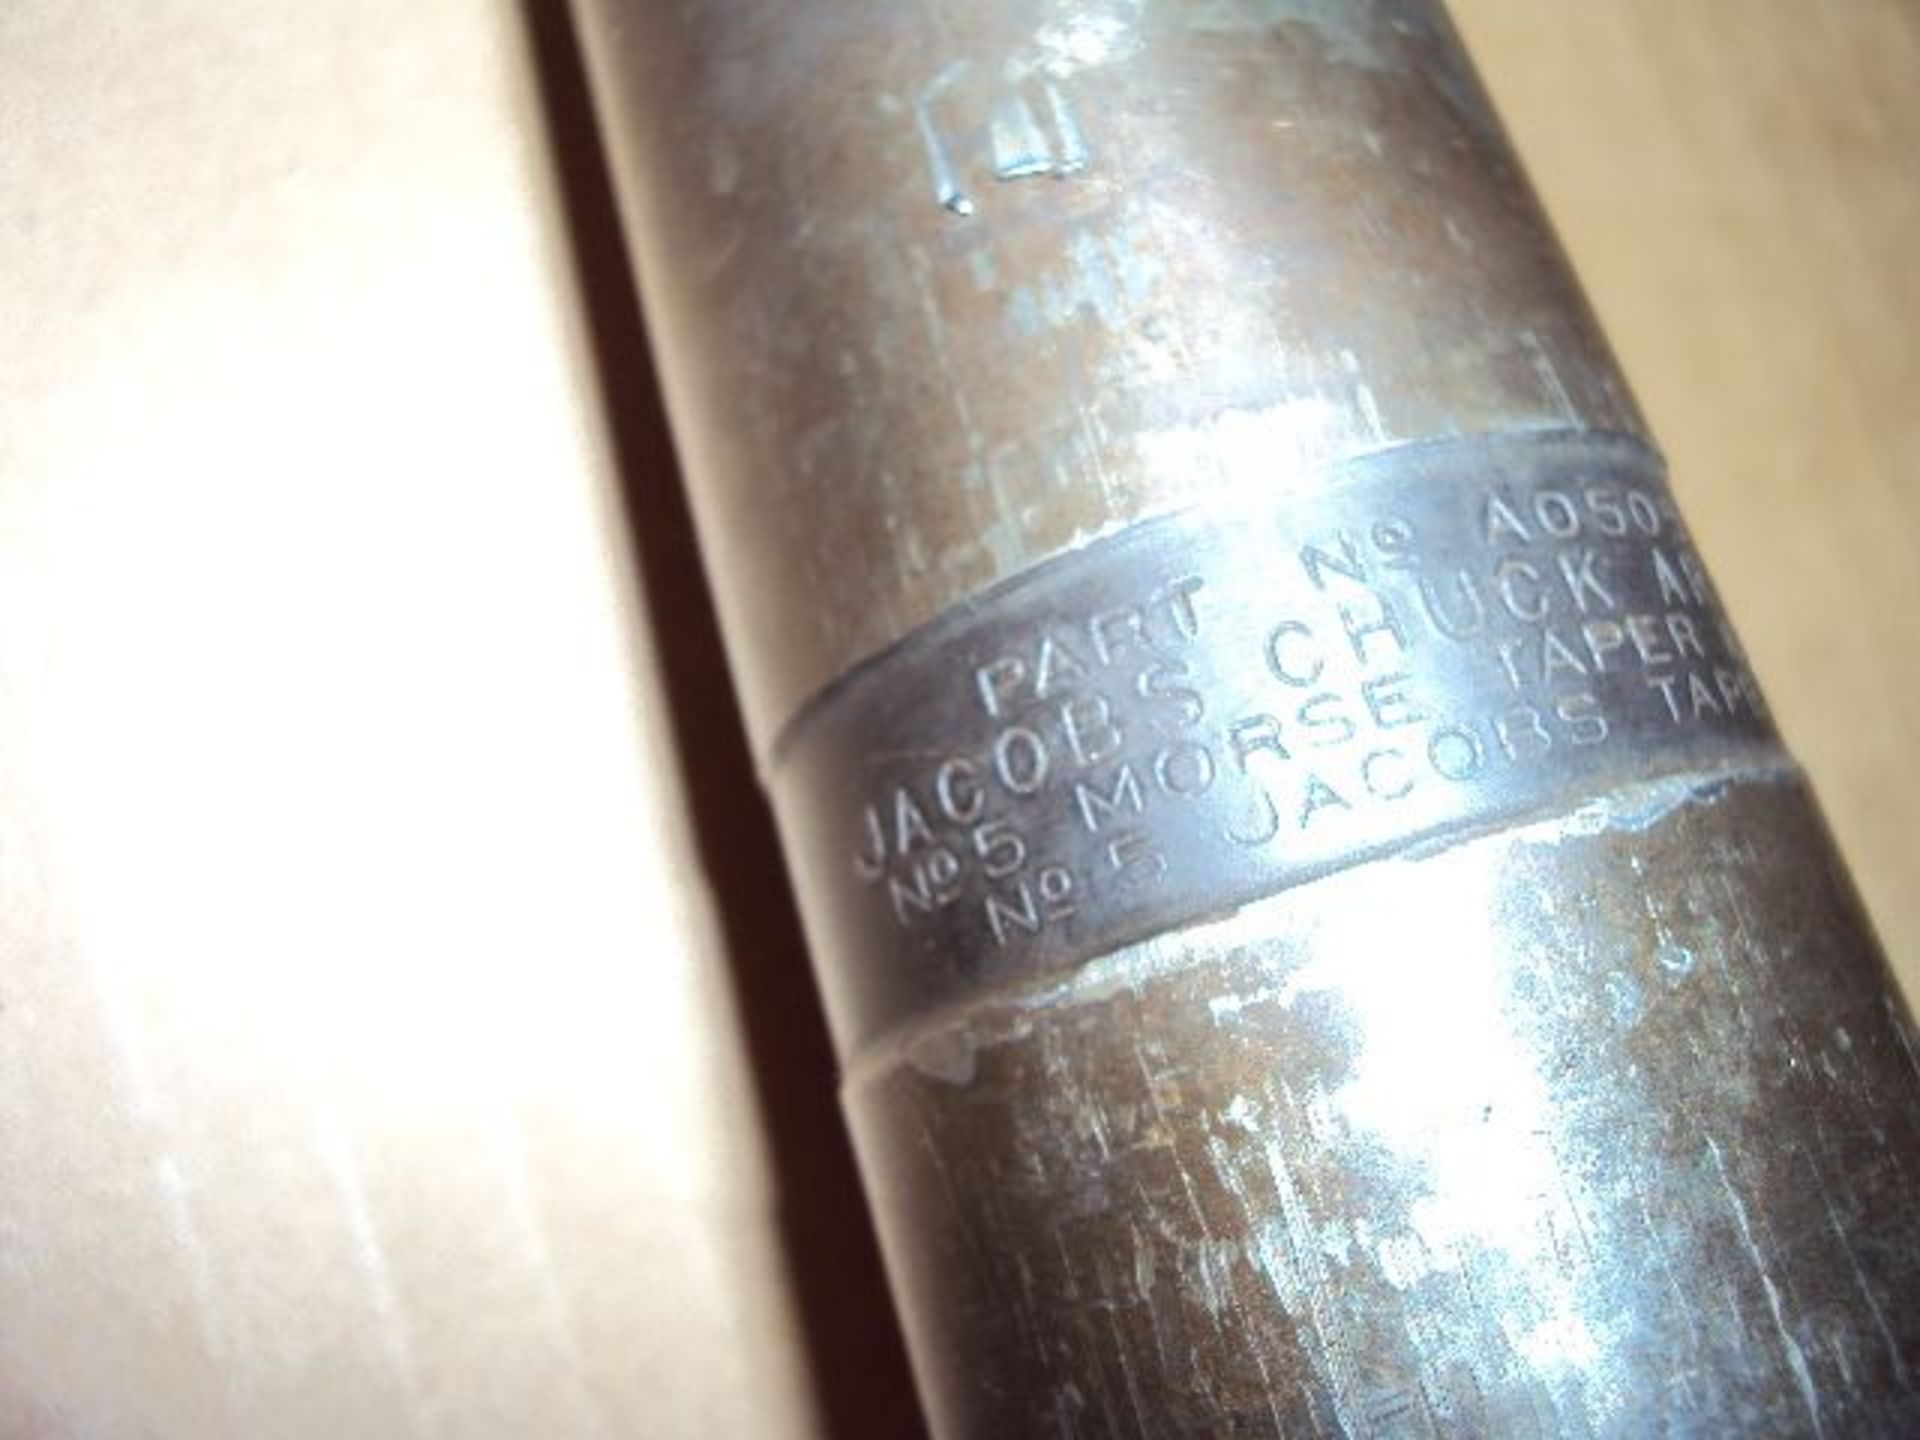 Jacobs No. 20N Super Ball Bearing Drill Chuck with Jacobs MT5 Shank - Image 6 of 6